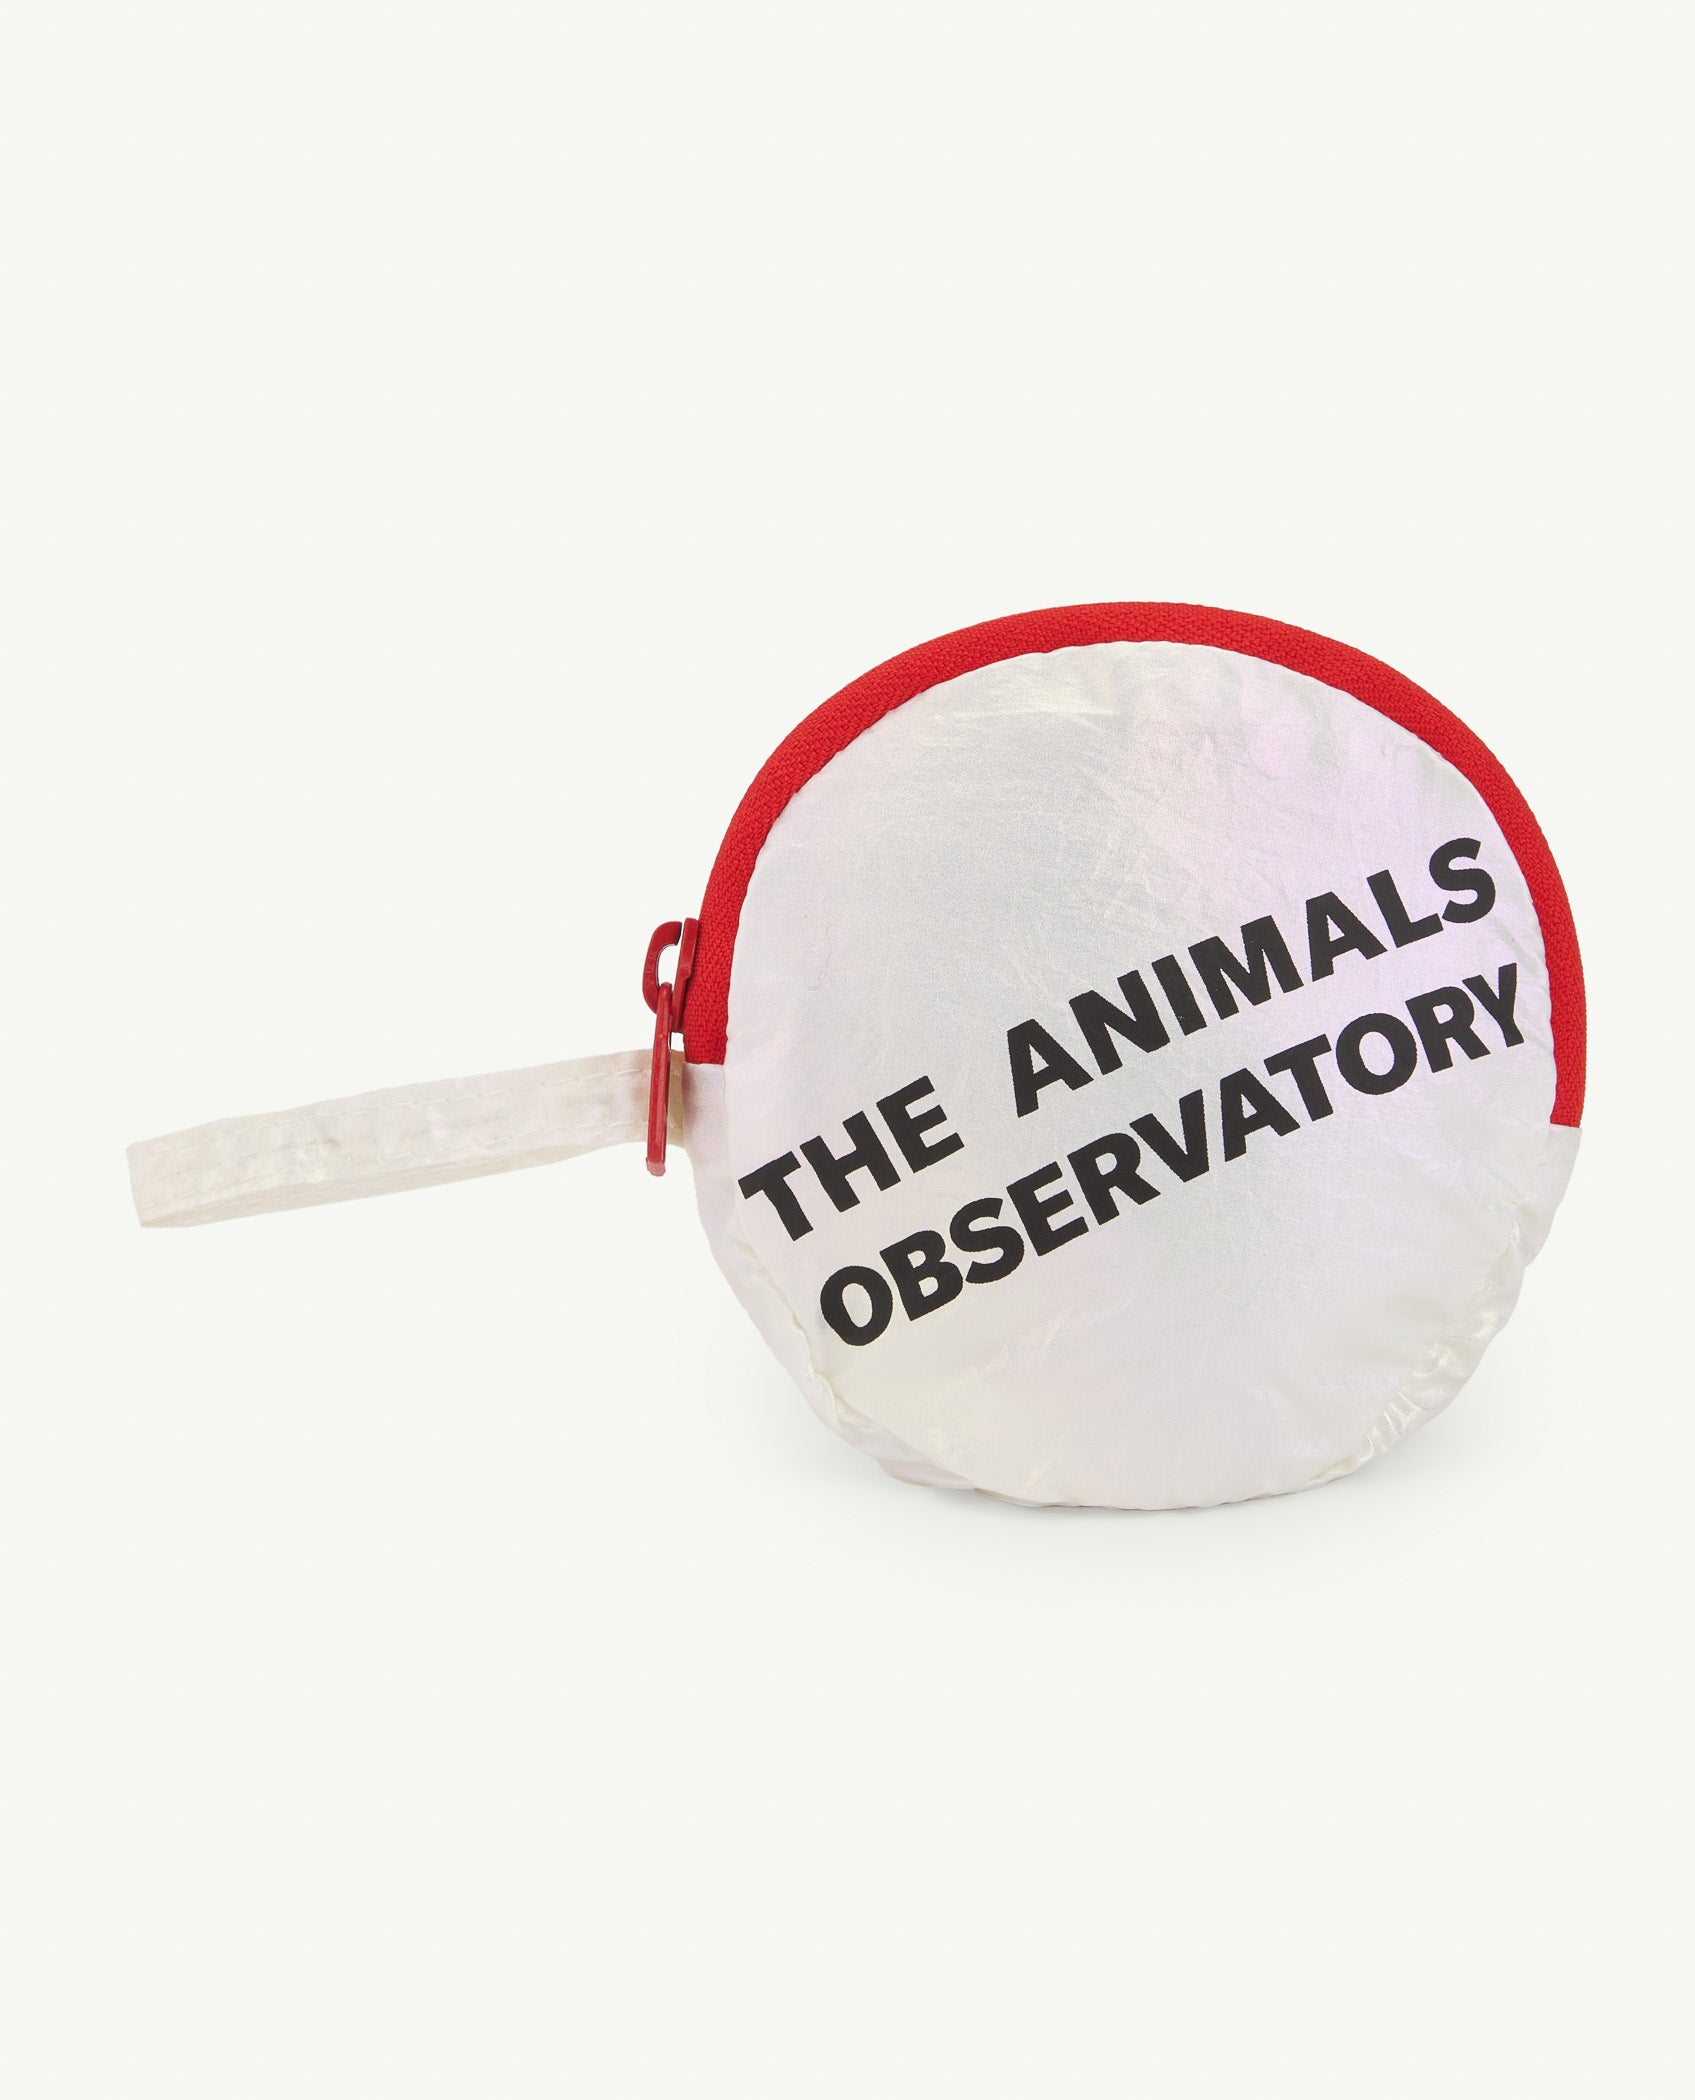 The animals observatory - small purse